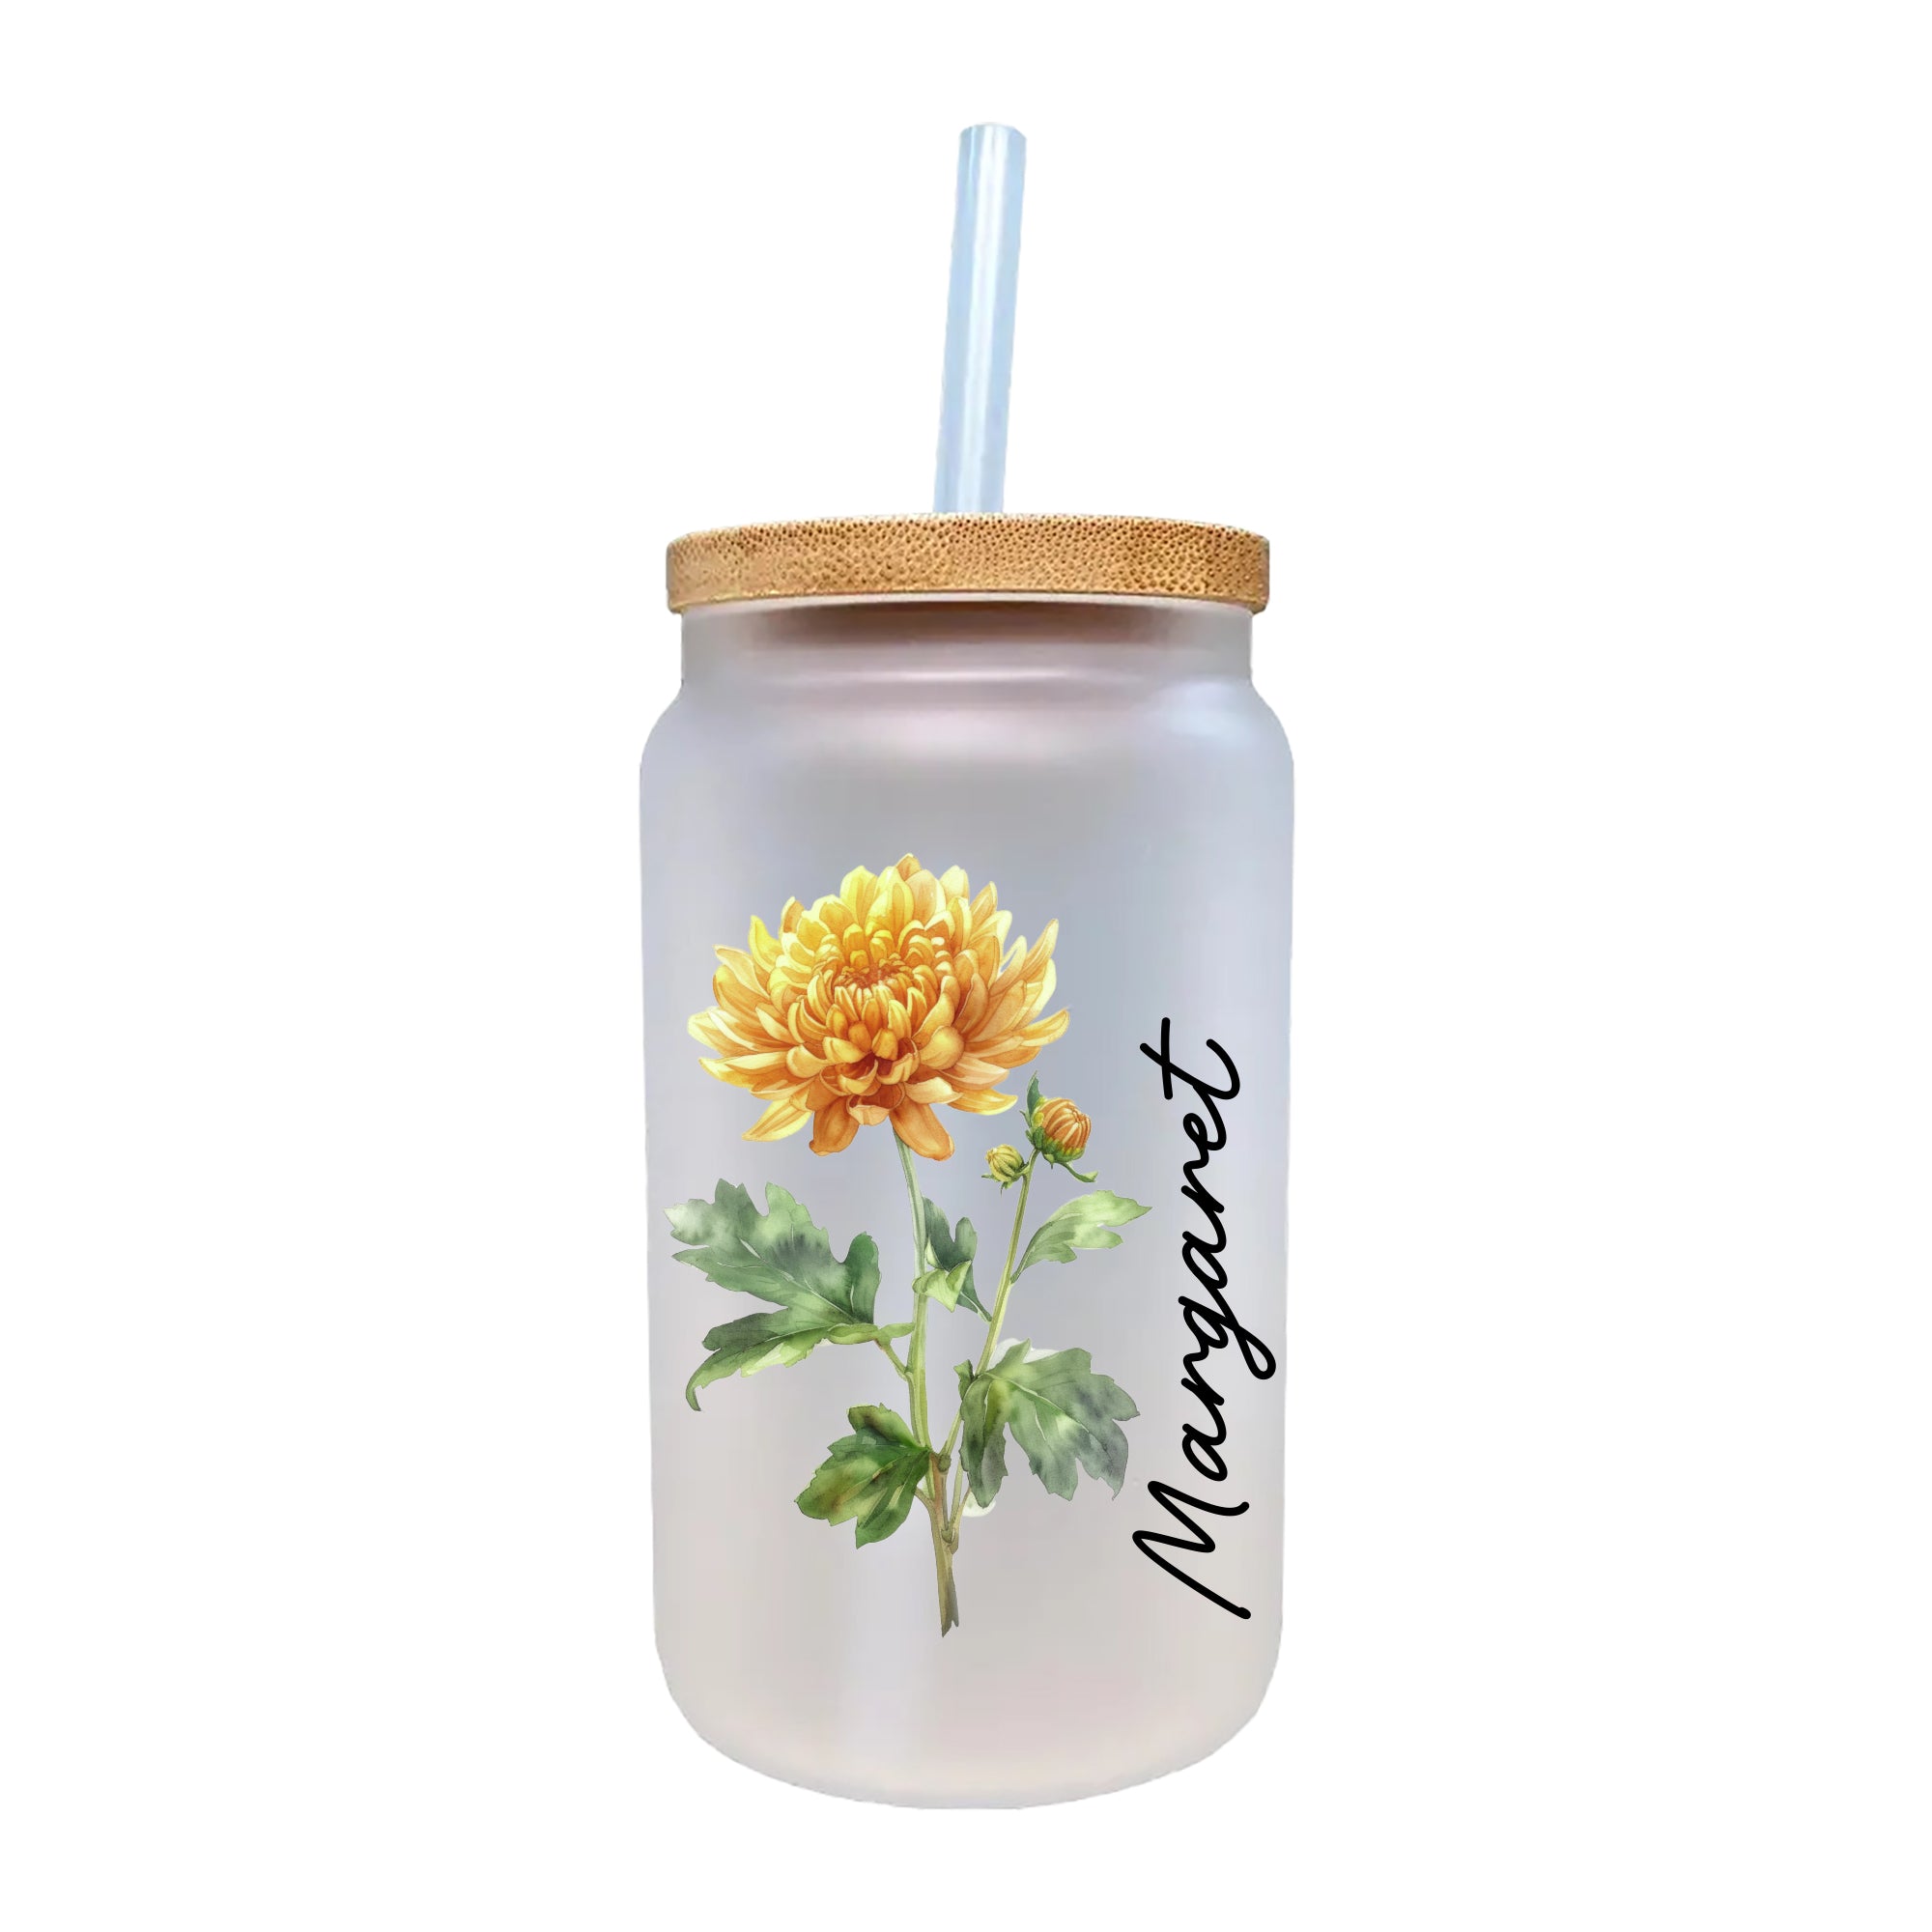 a glass jar with a yellow flower painted on it